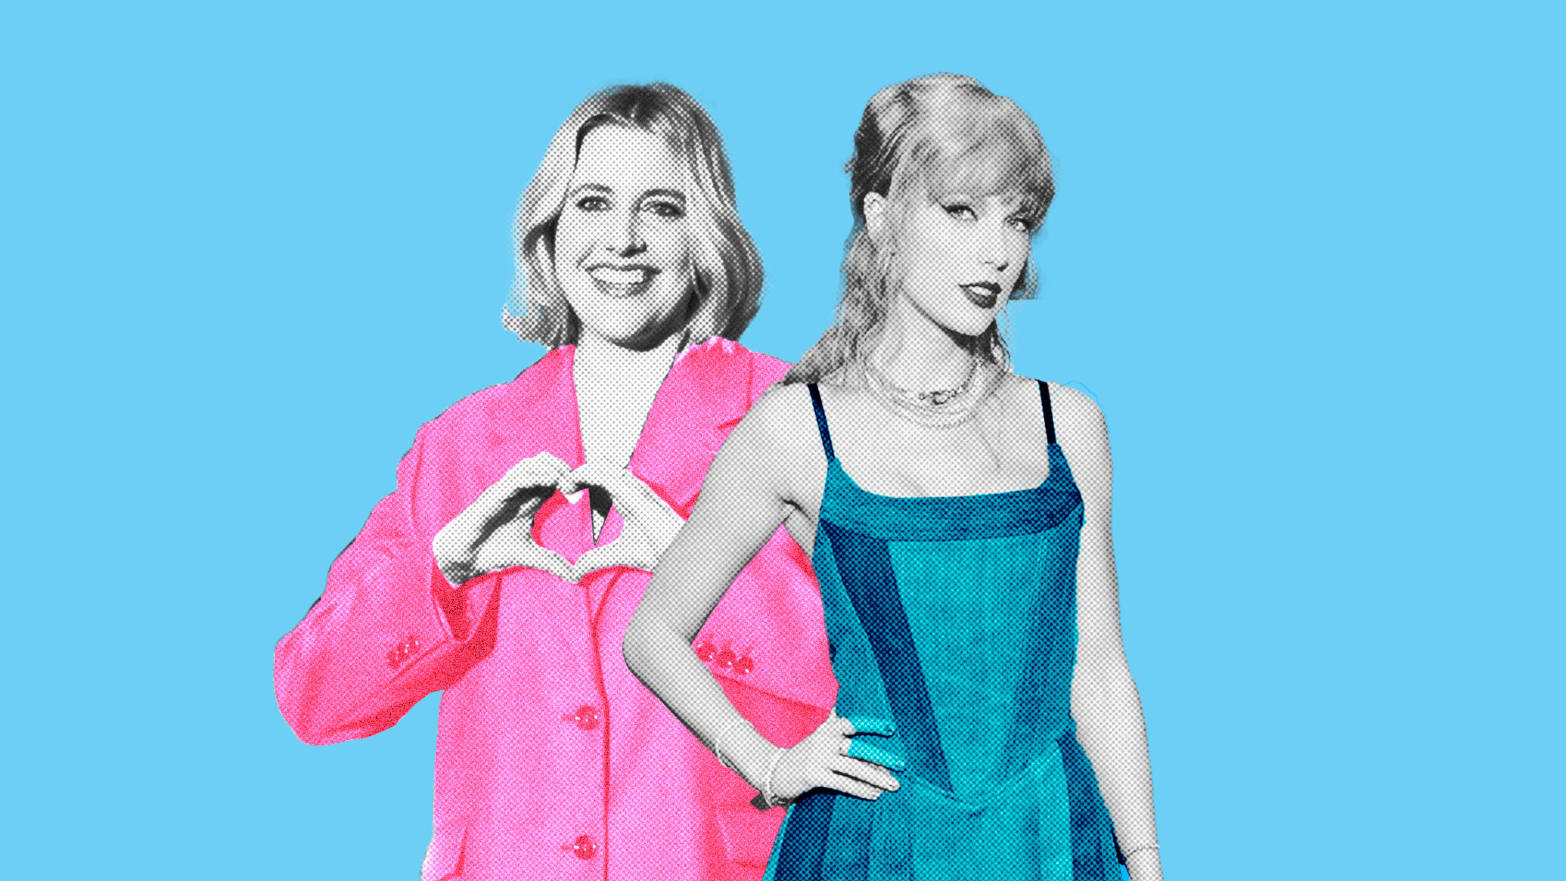 A photo illustration of Greta Gerwig in pink and Taylor Swift in blue